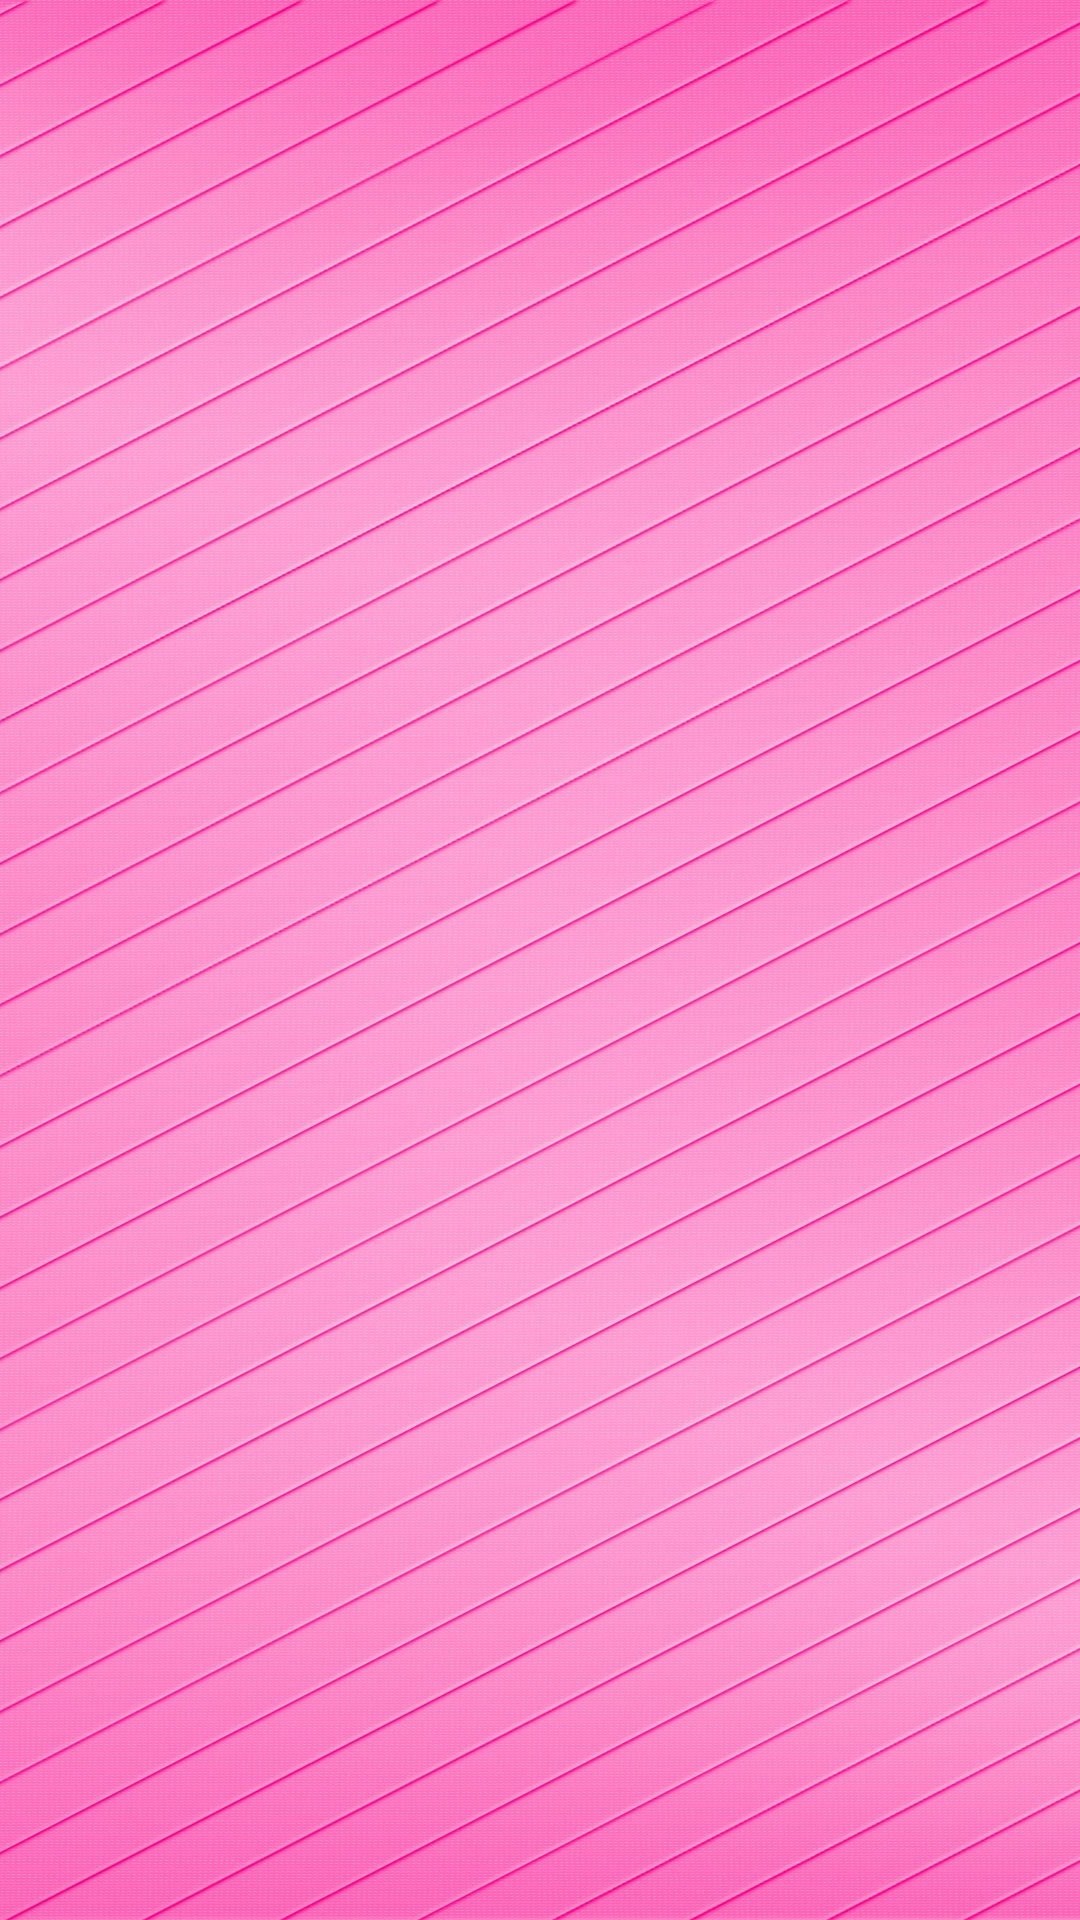 Pink Wallpaper For Android Mobile with HD resolution 1080x1920